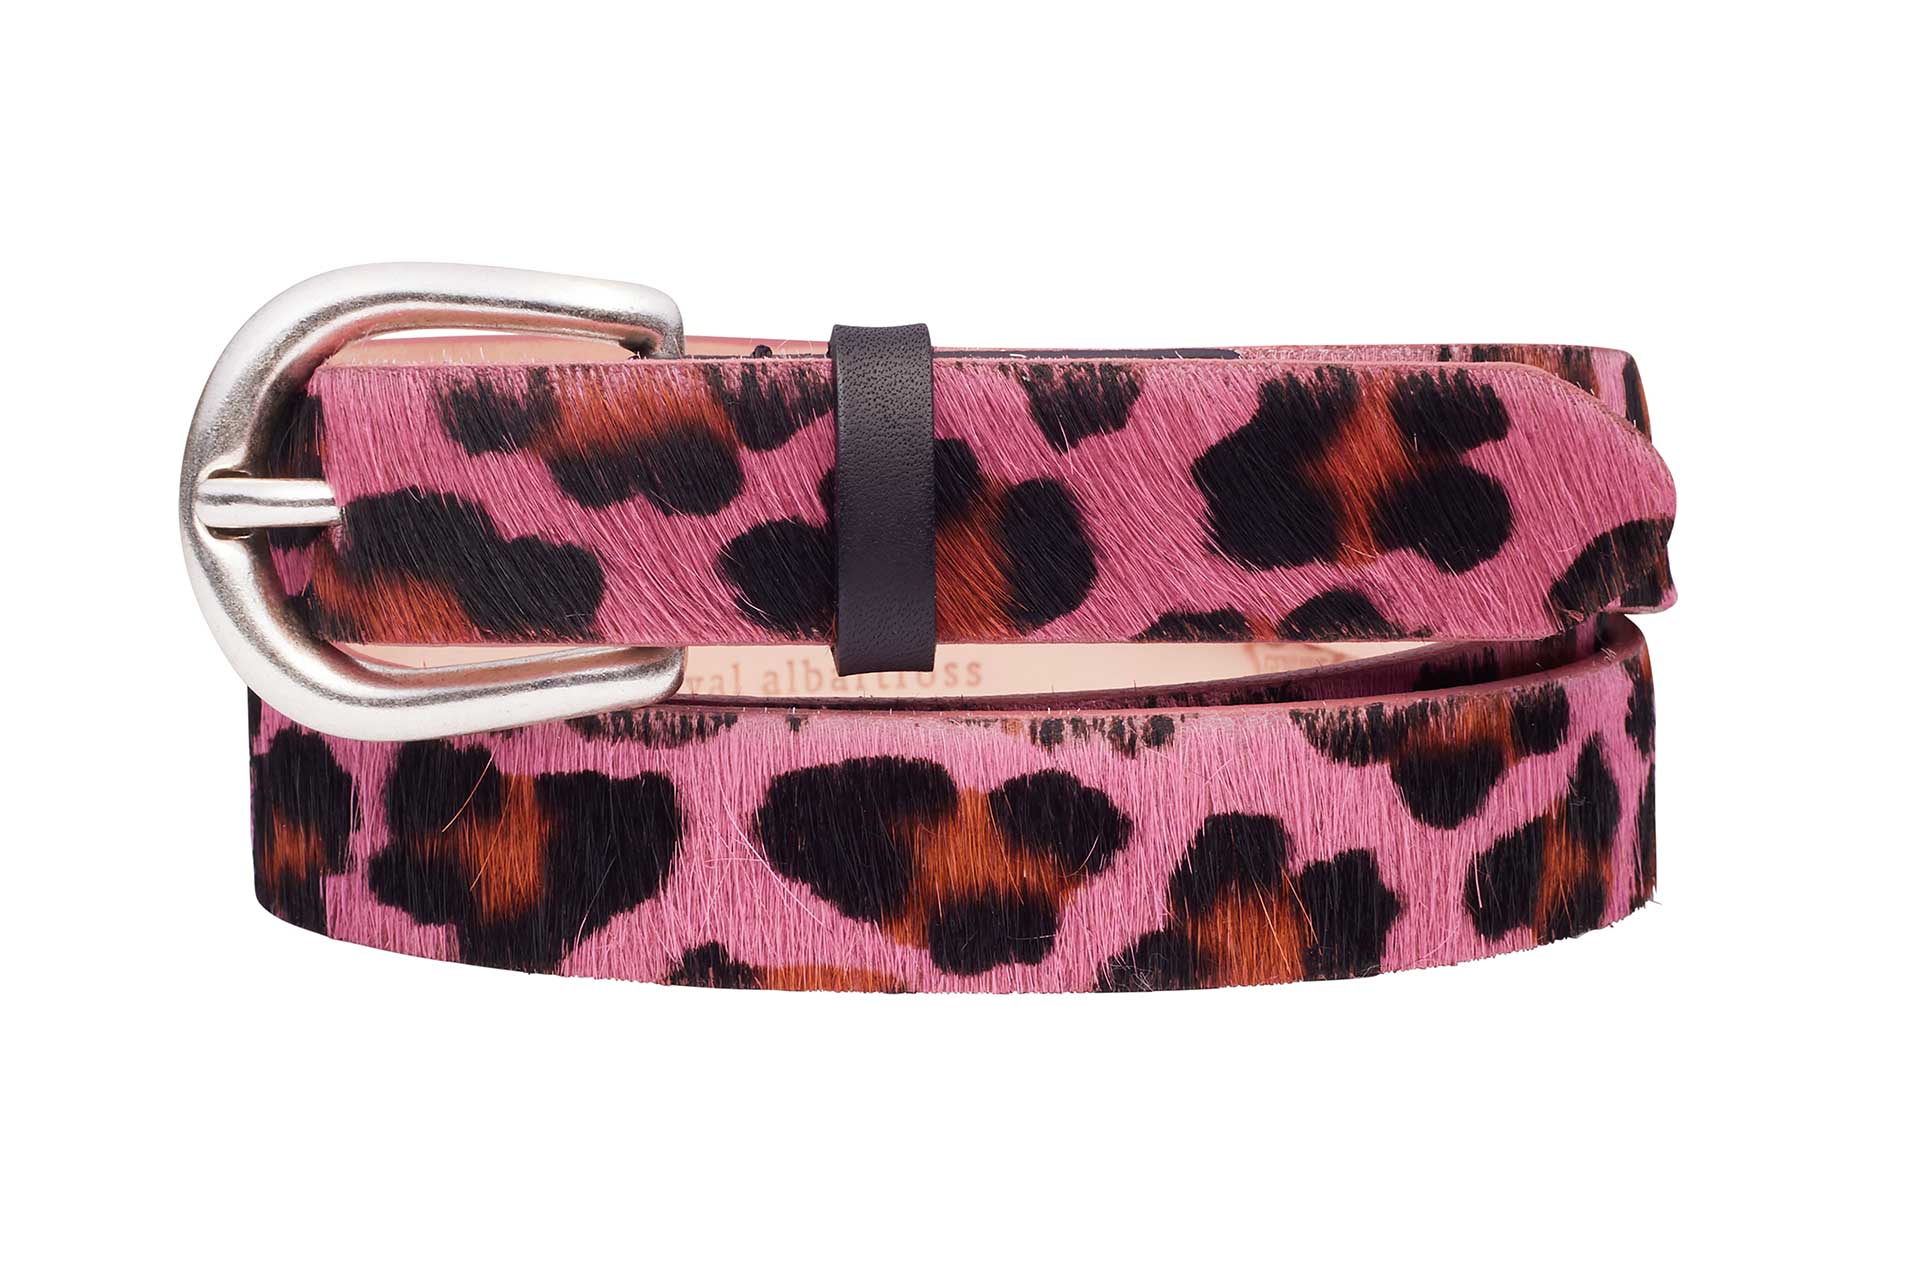 One Tone Faux Leather GG Belt in Hot Pink